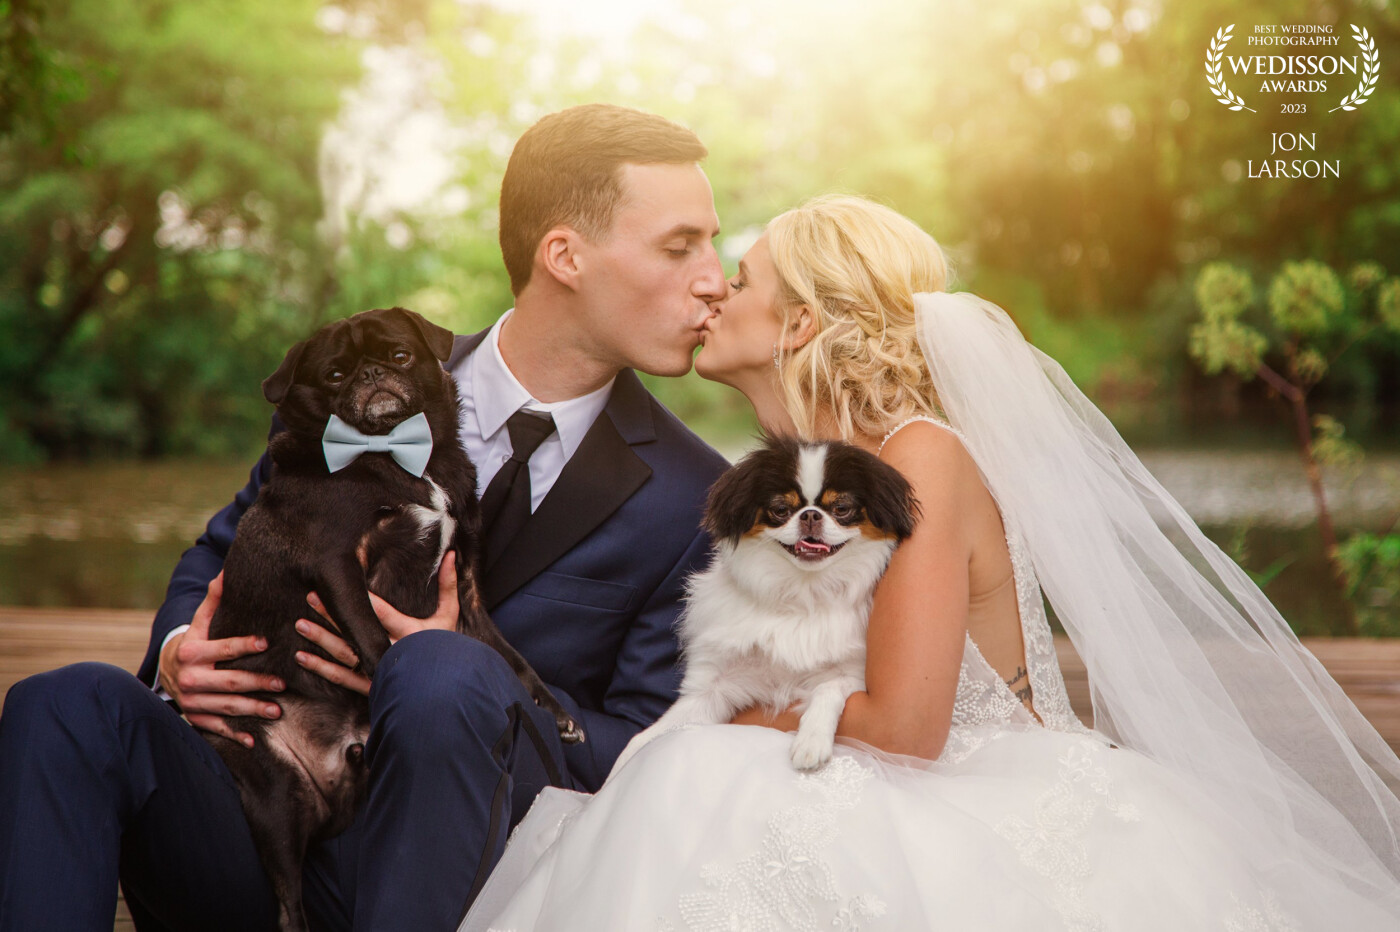 Jon and Lauren enjoying each other and a moment with their pups just after their ceremony.